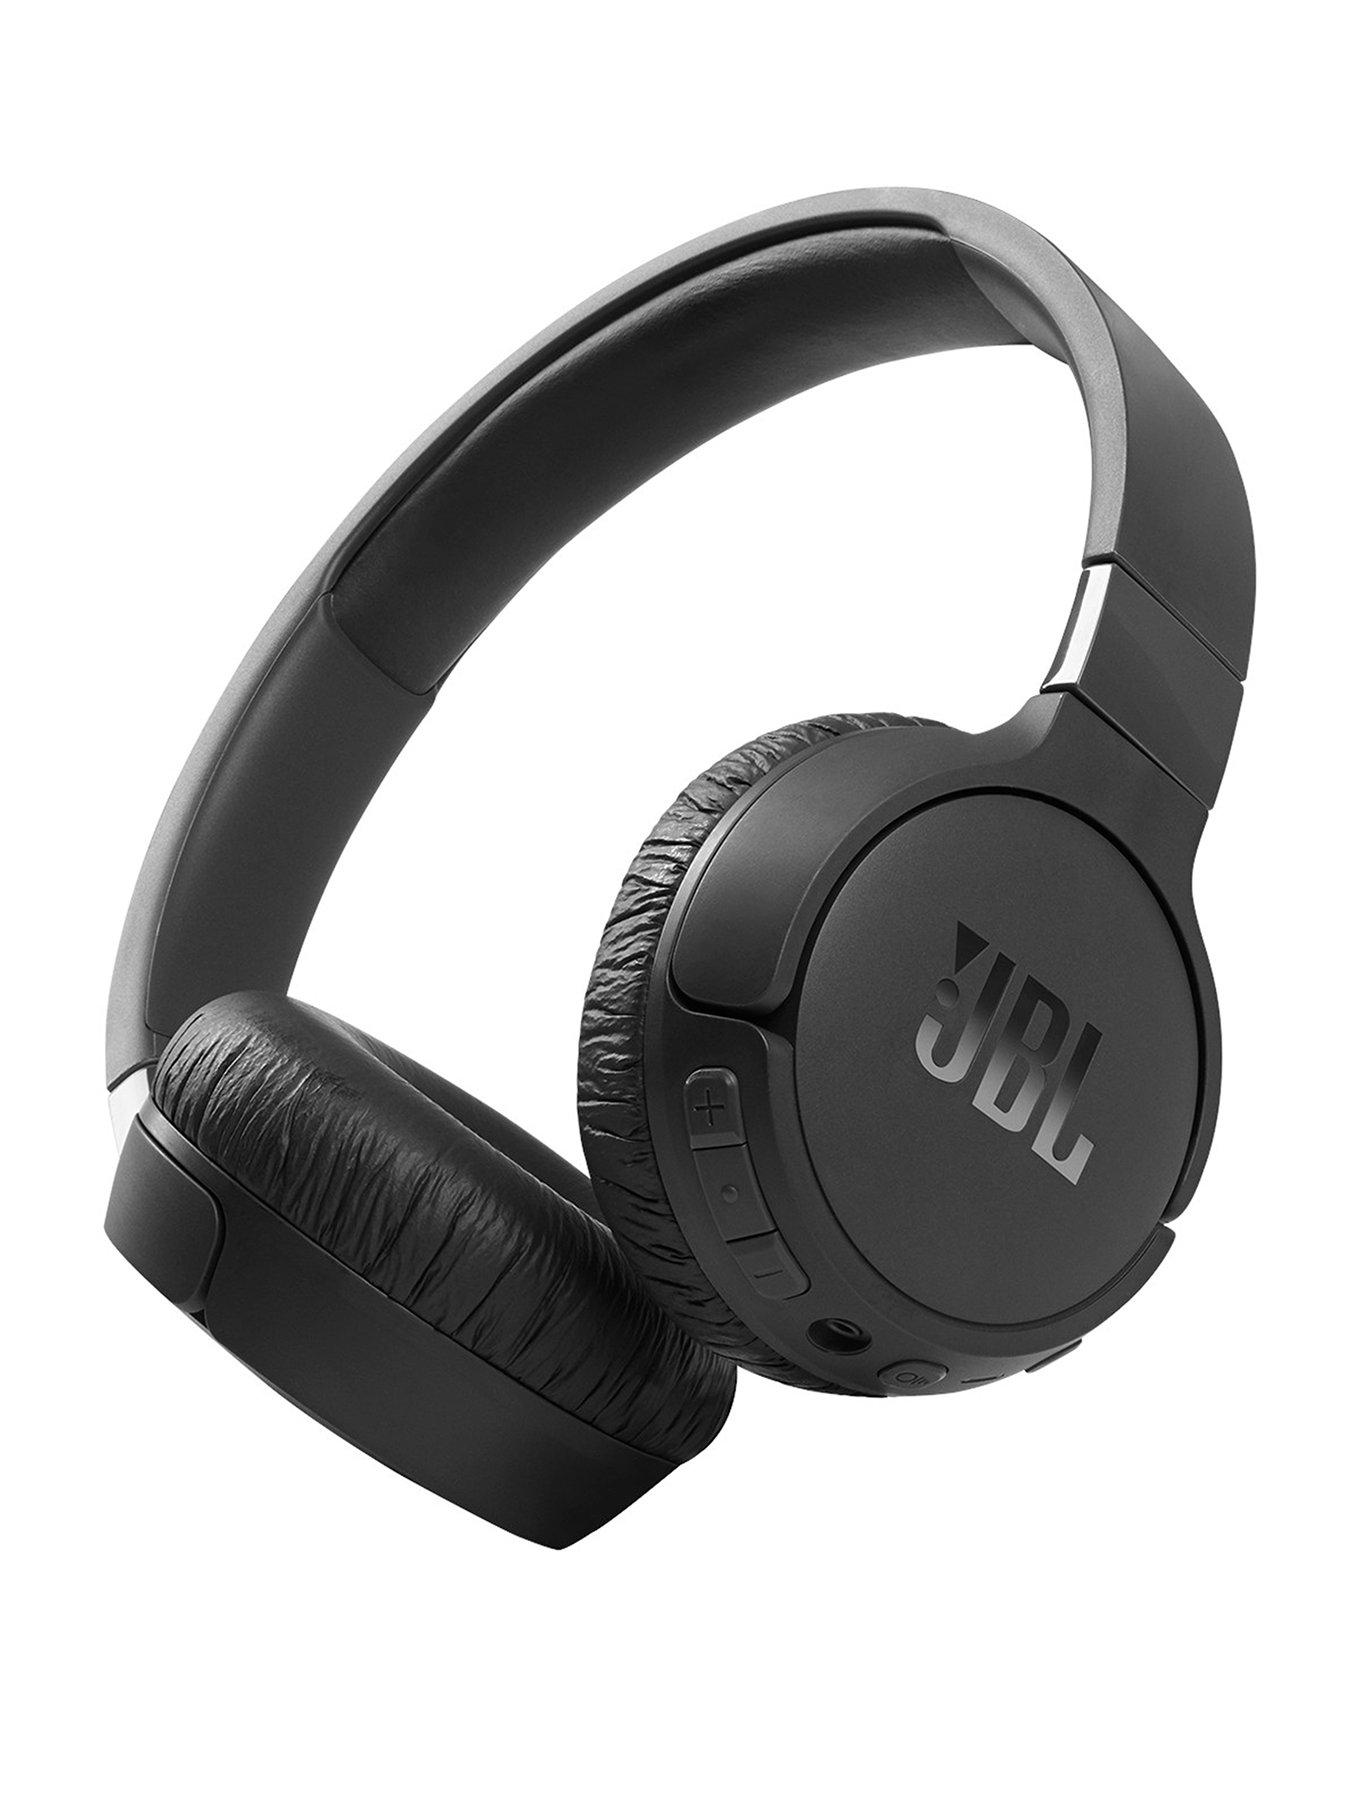 Listen wirelessly anywhere with these $37.99 JBL earbuds